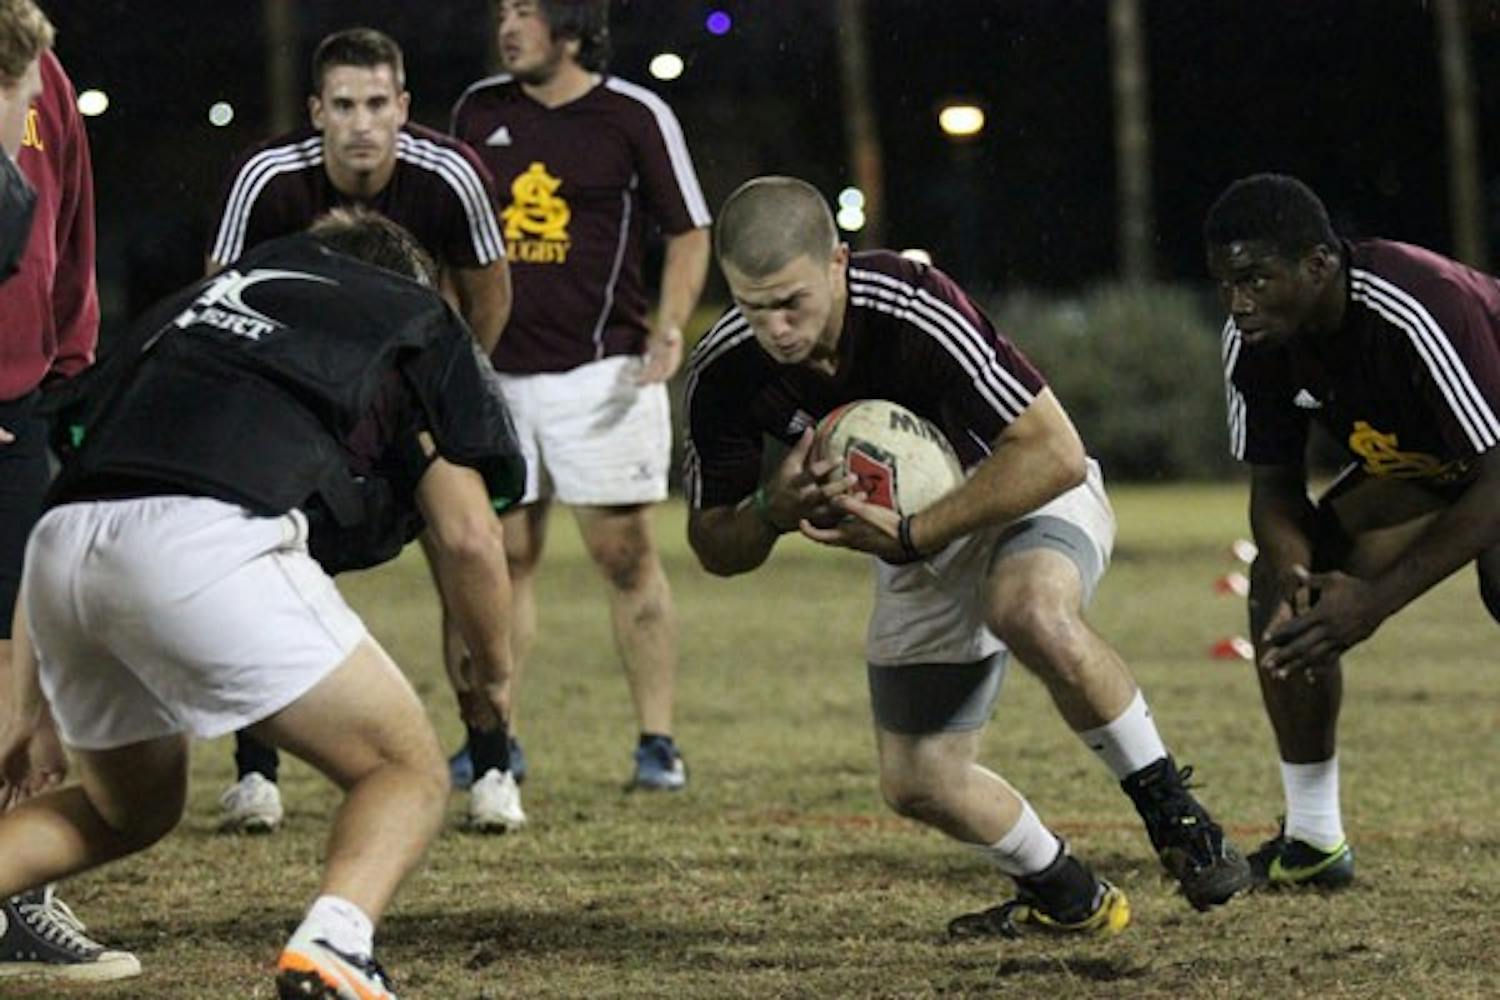 Health solutions junior Thomas Boyle practices at an ASU rugby practice on the Sun Devil Fitness Complex fields on Nov. 8. (Photo by Kyle Newman)